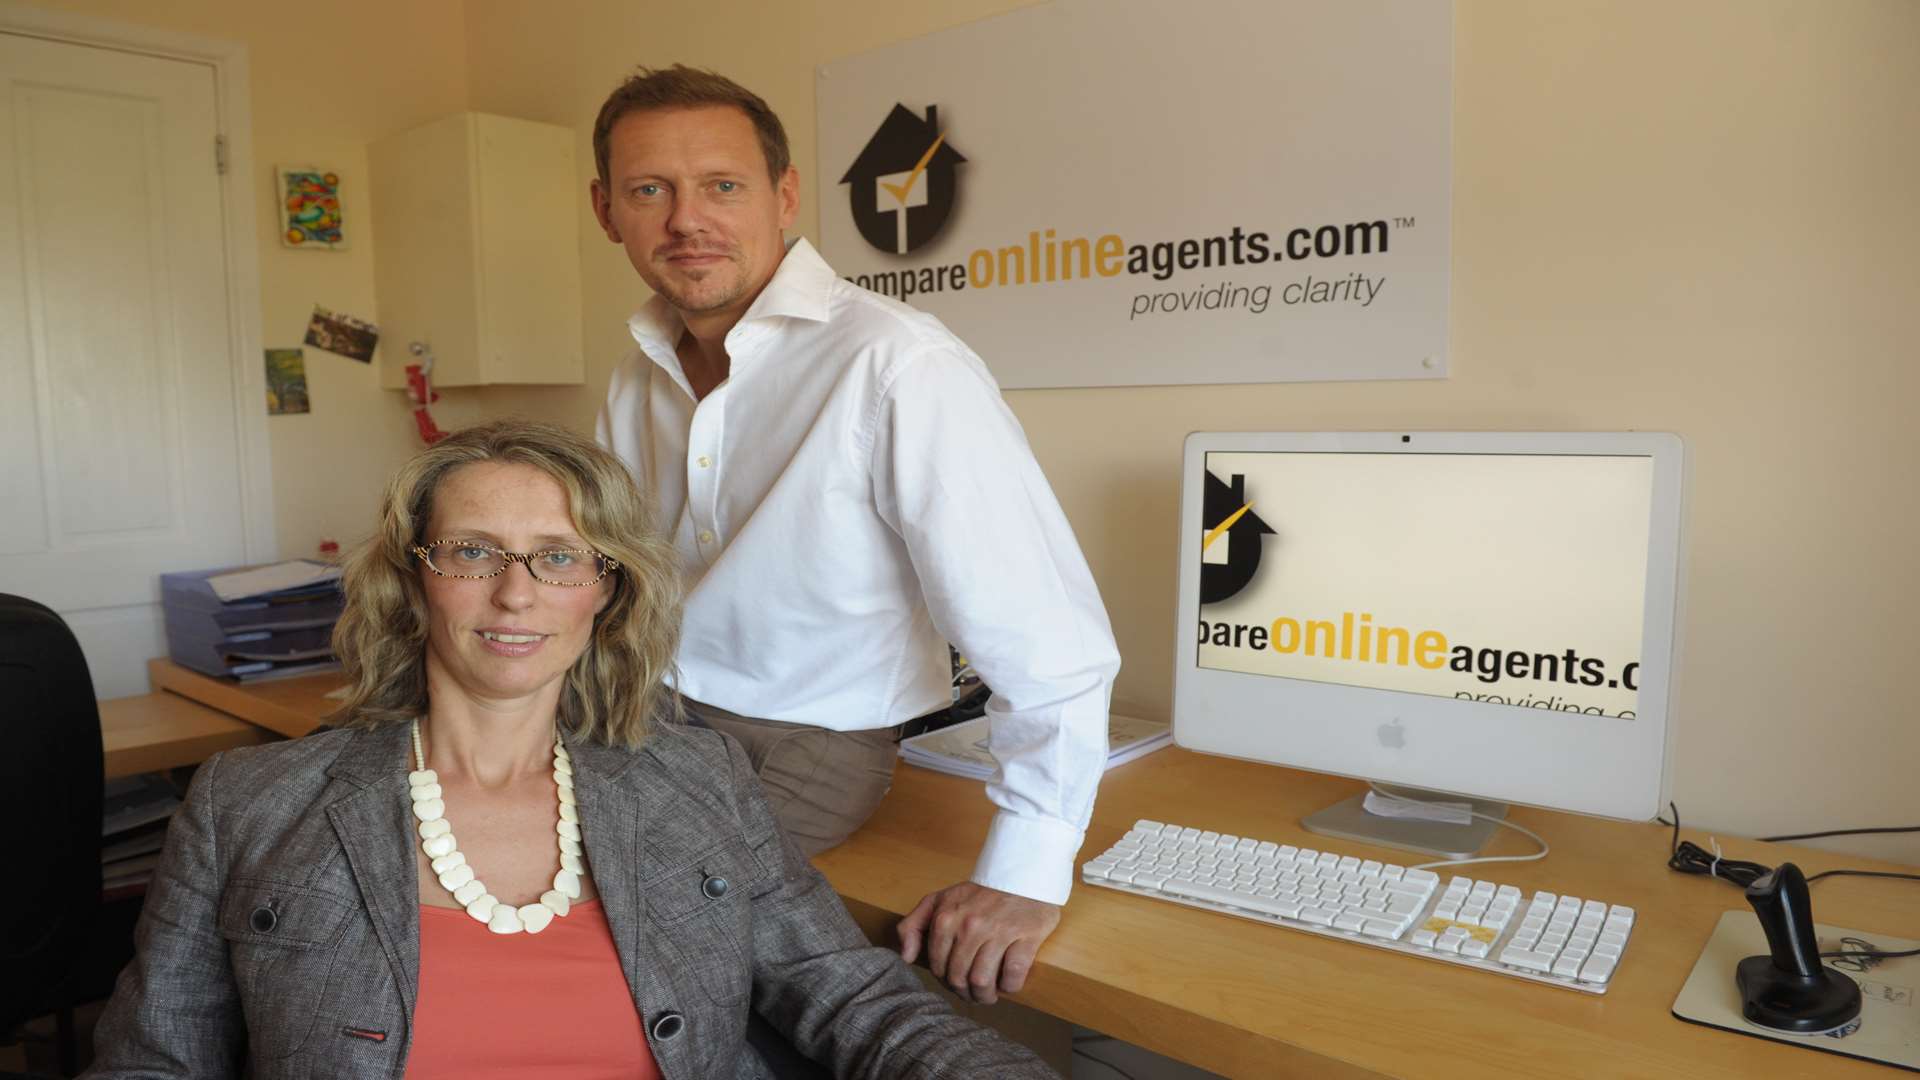 Robert Ashley and Francesca Marchesini-Ashley have run an online estate agent comparison site for two years